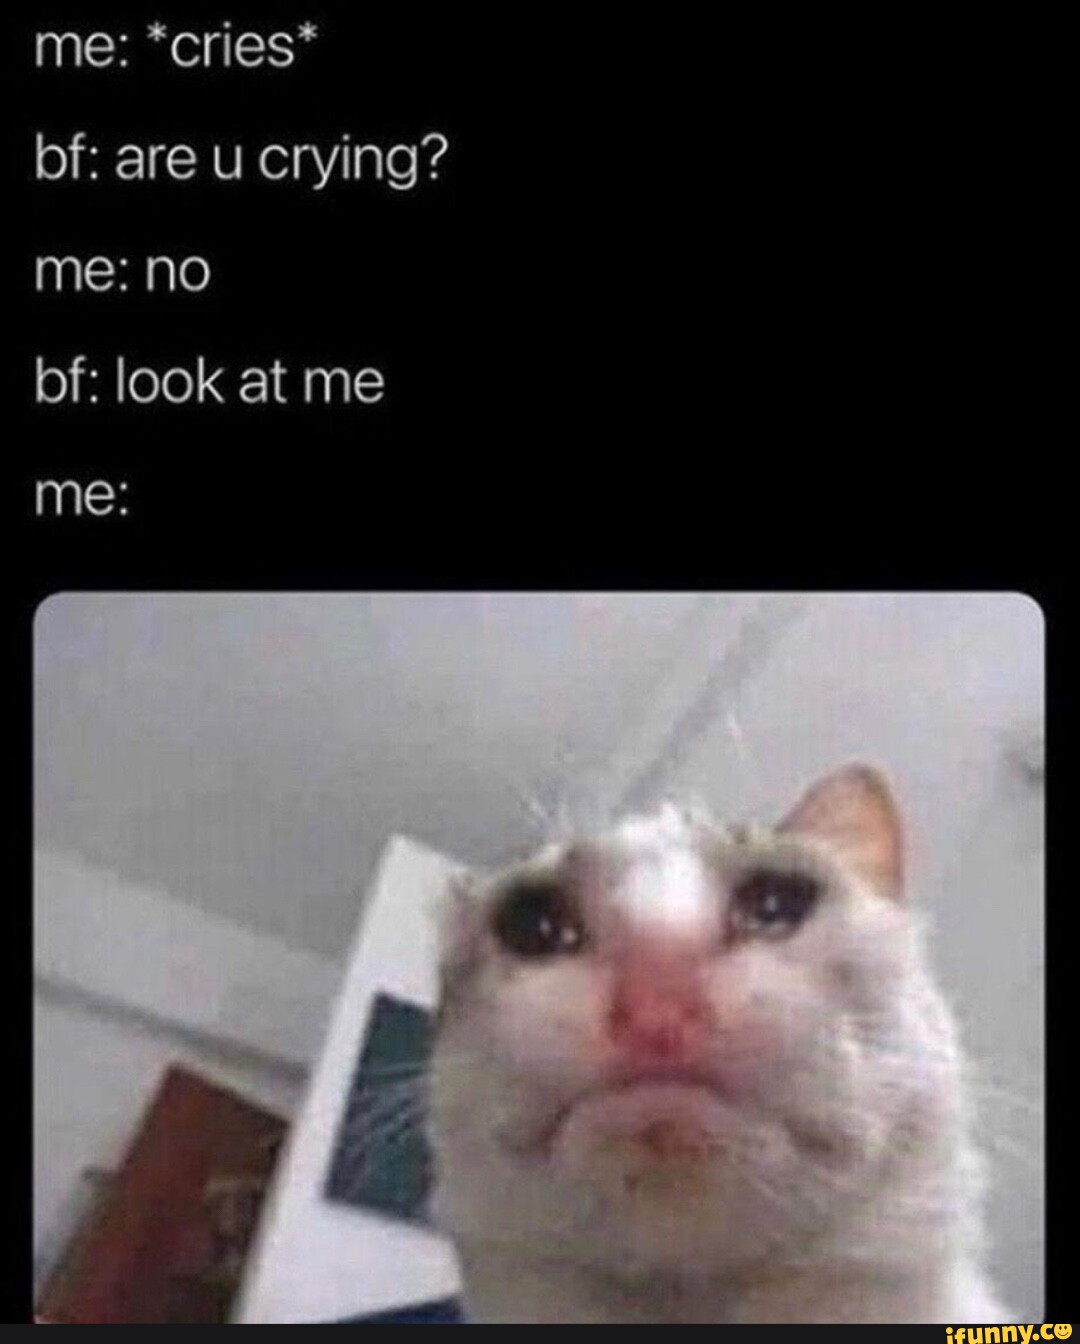 Me: *cries* bf: are u crying? me: no bf: look at me me: - iFunny